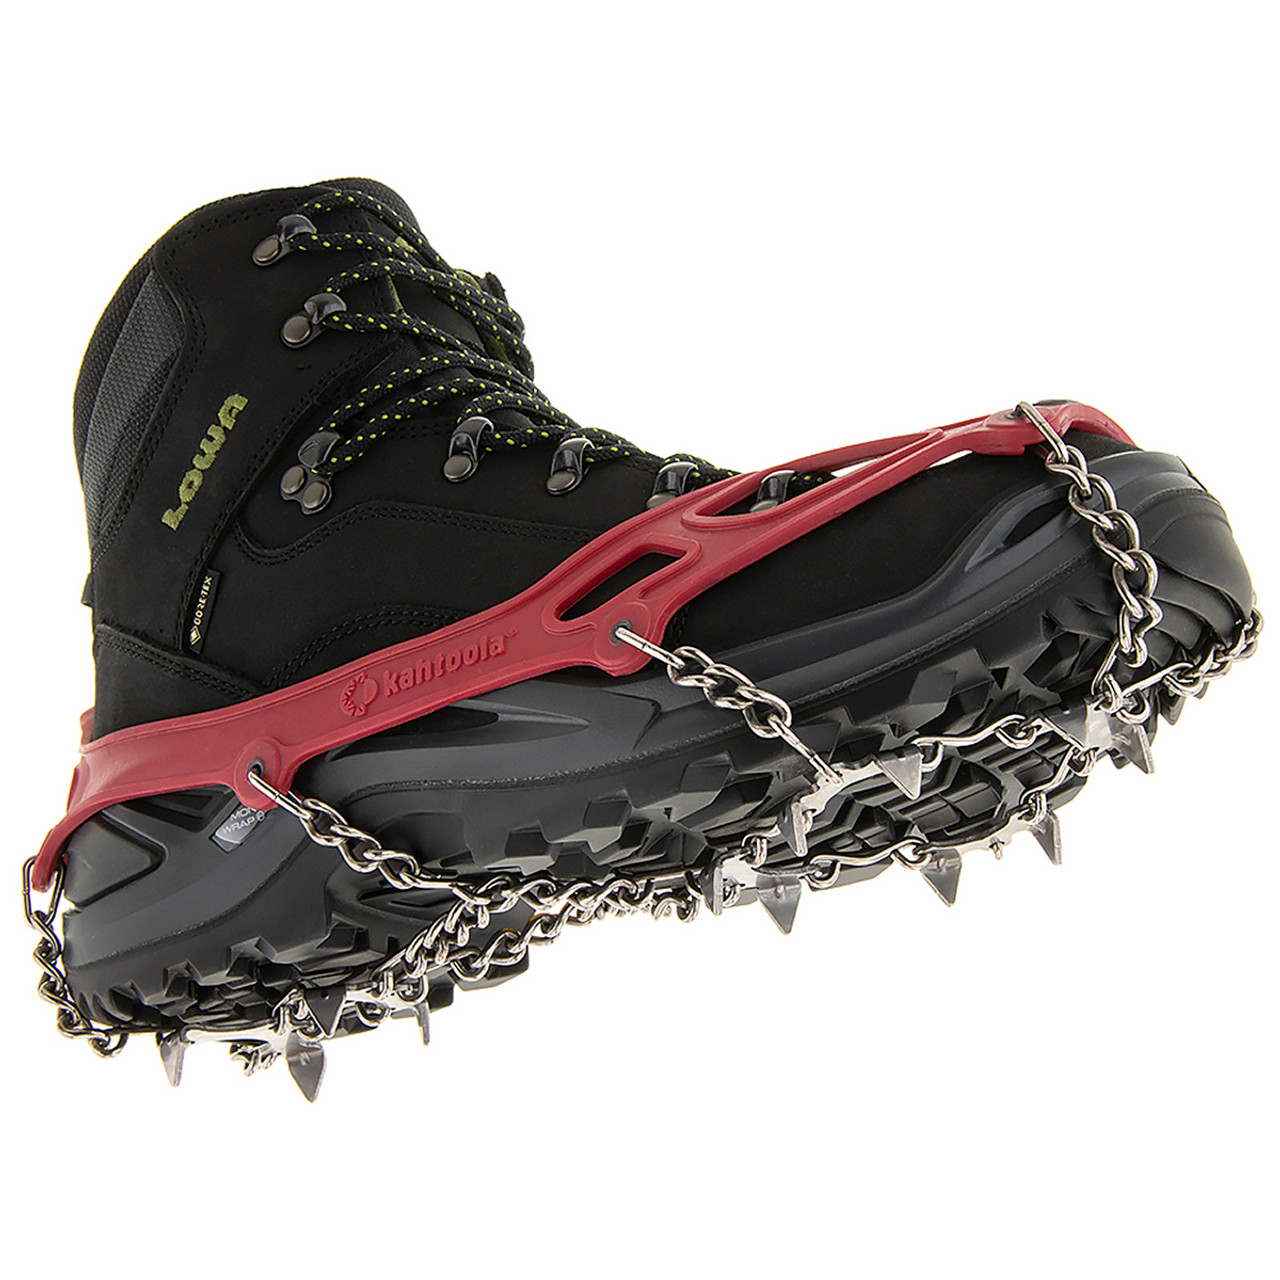 MICROspikes® Footwear Traction